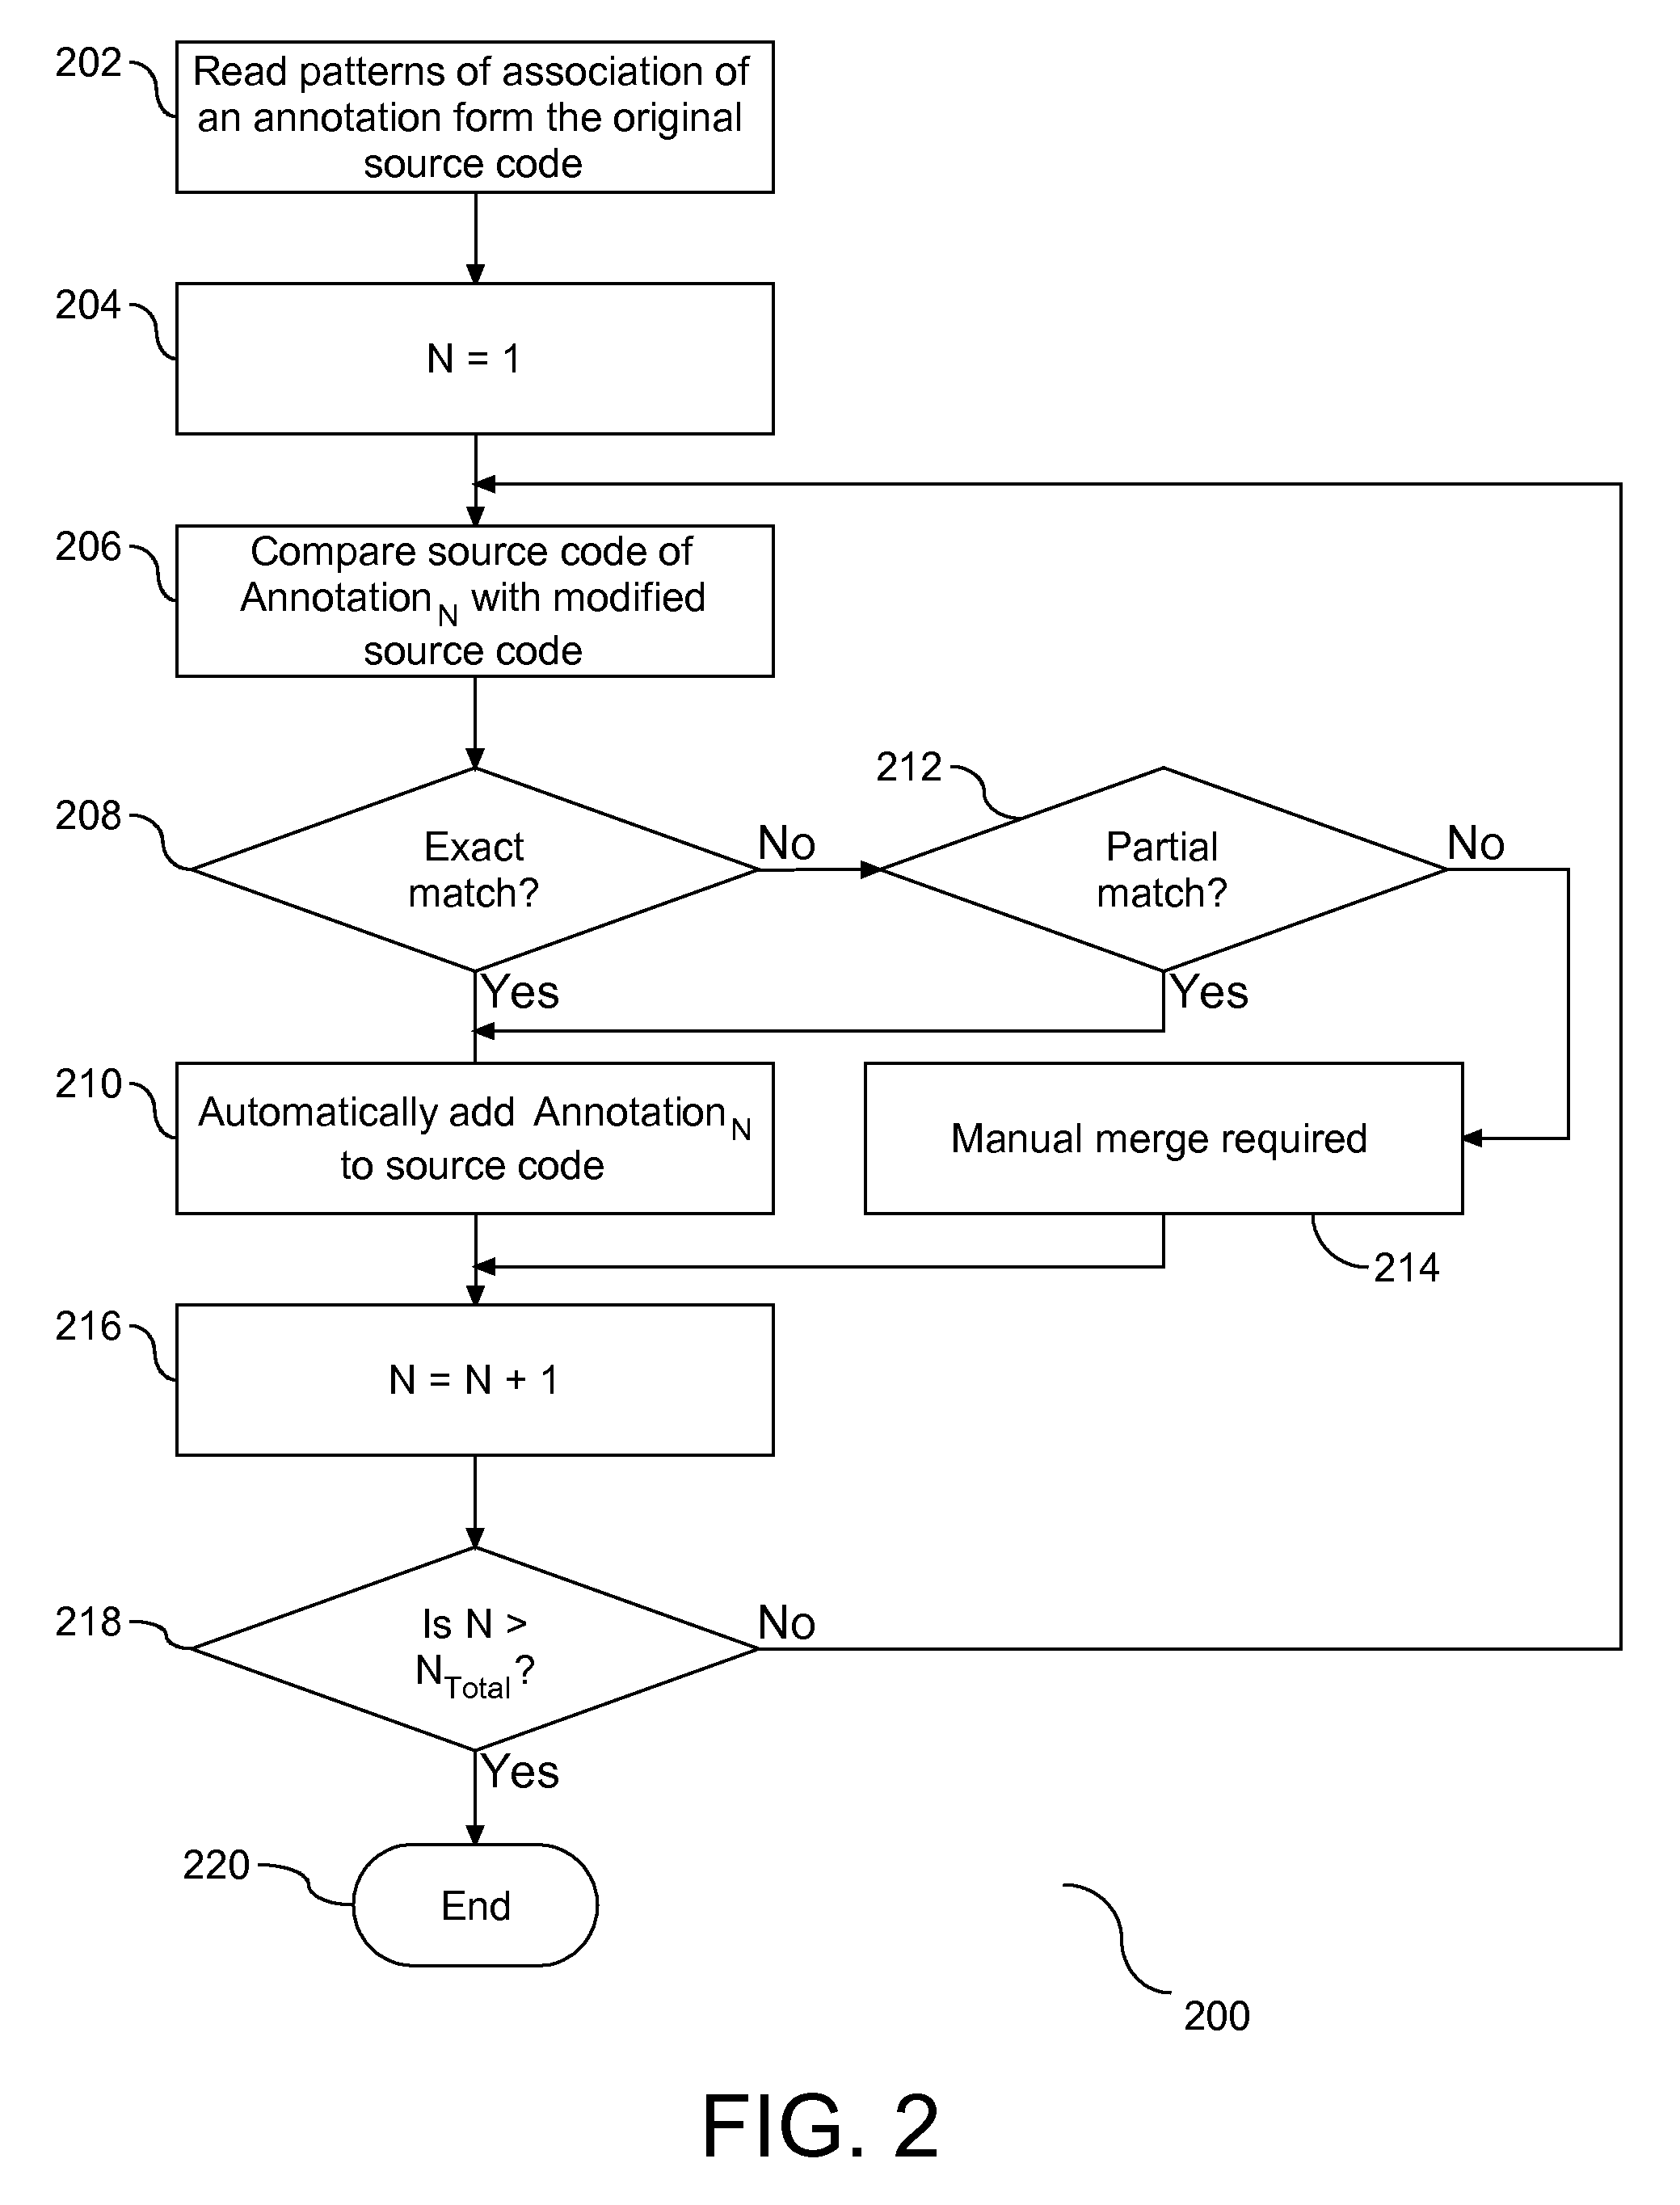 Method To Transfer Annotation Across Versions of the Data